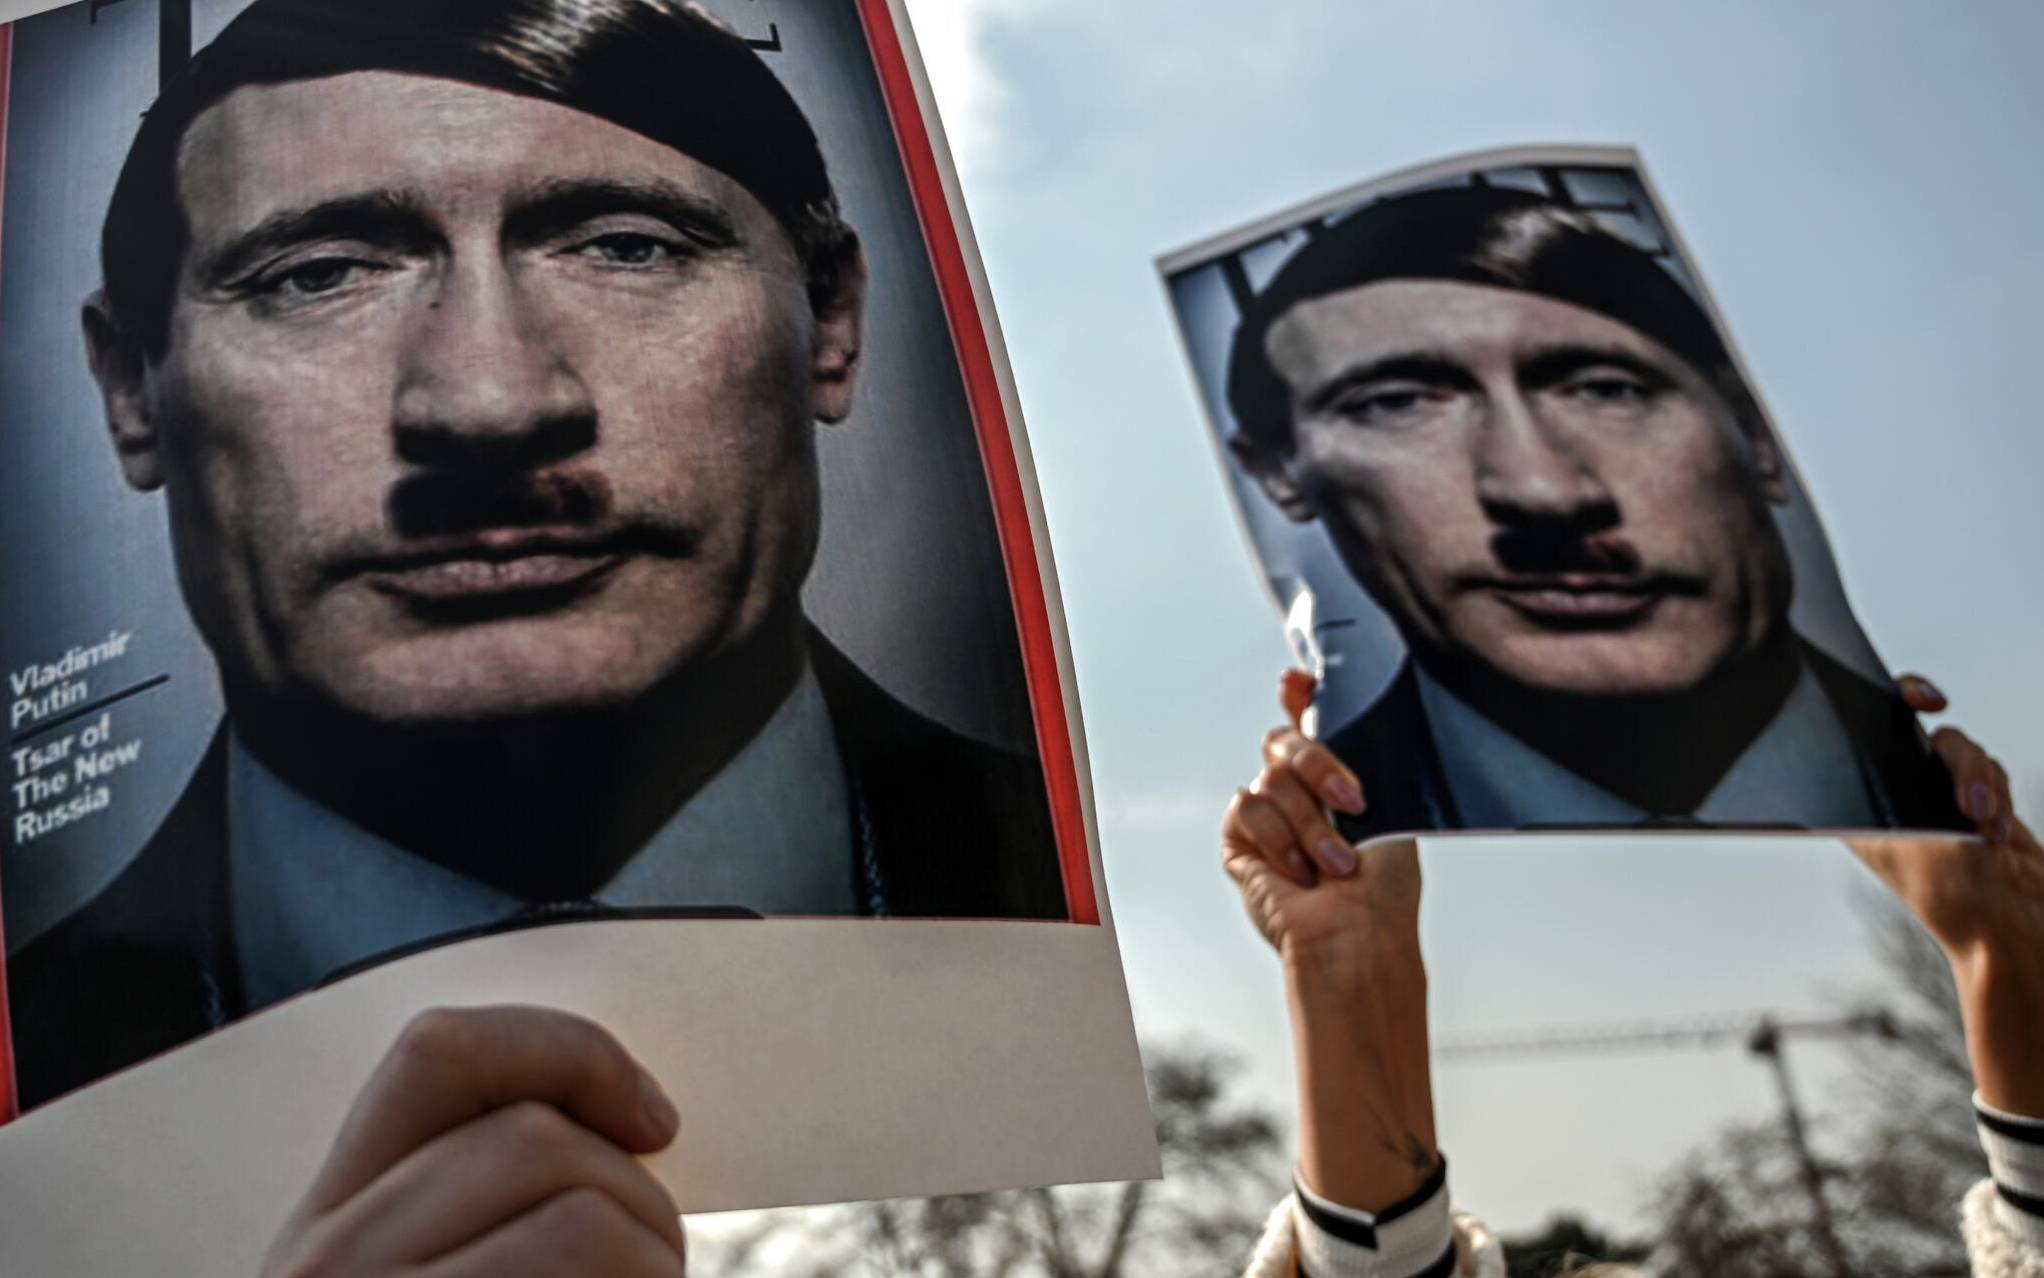 Protesters hold pictures depicting Russian President Vladimir Putin as Adolf Hitler during a rally against Russia's invasion of Ukraine at Beyazid district in Istanbul, on February 26, 2022. (Photo by Ozan KOSE / AFP)